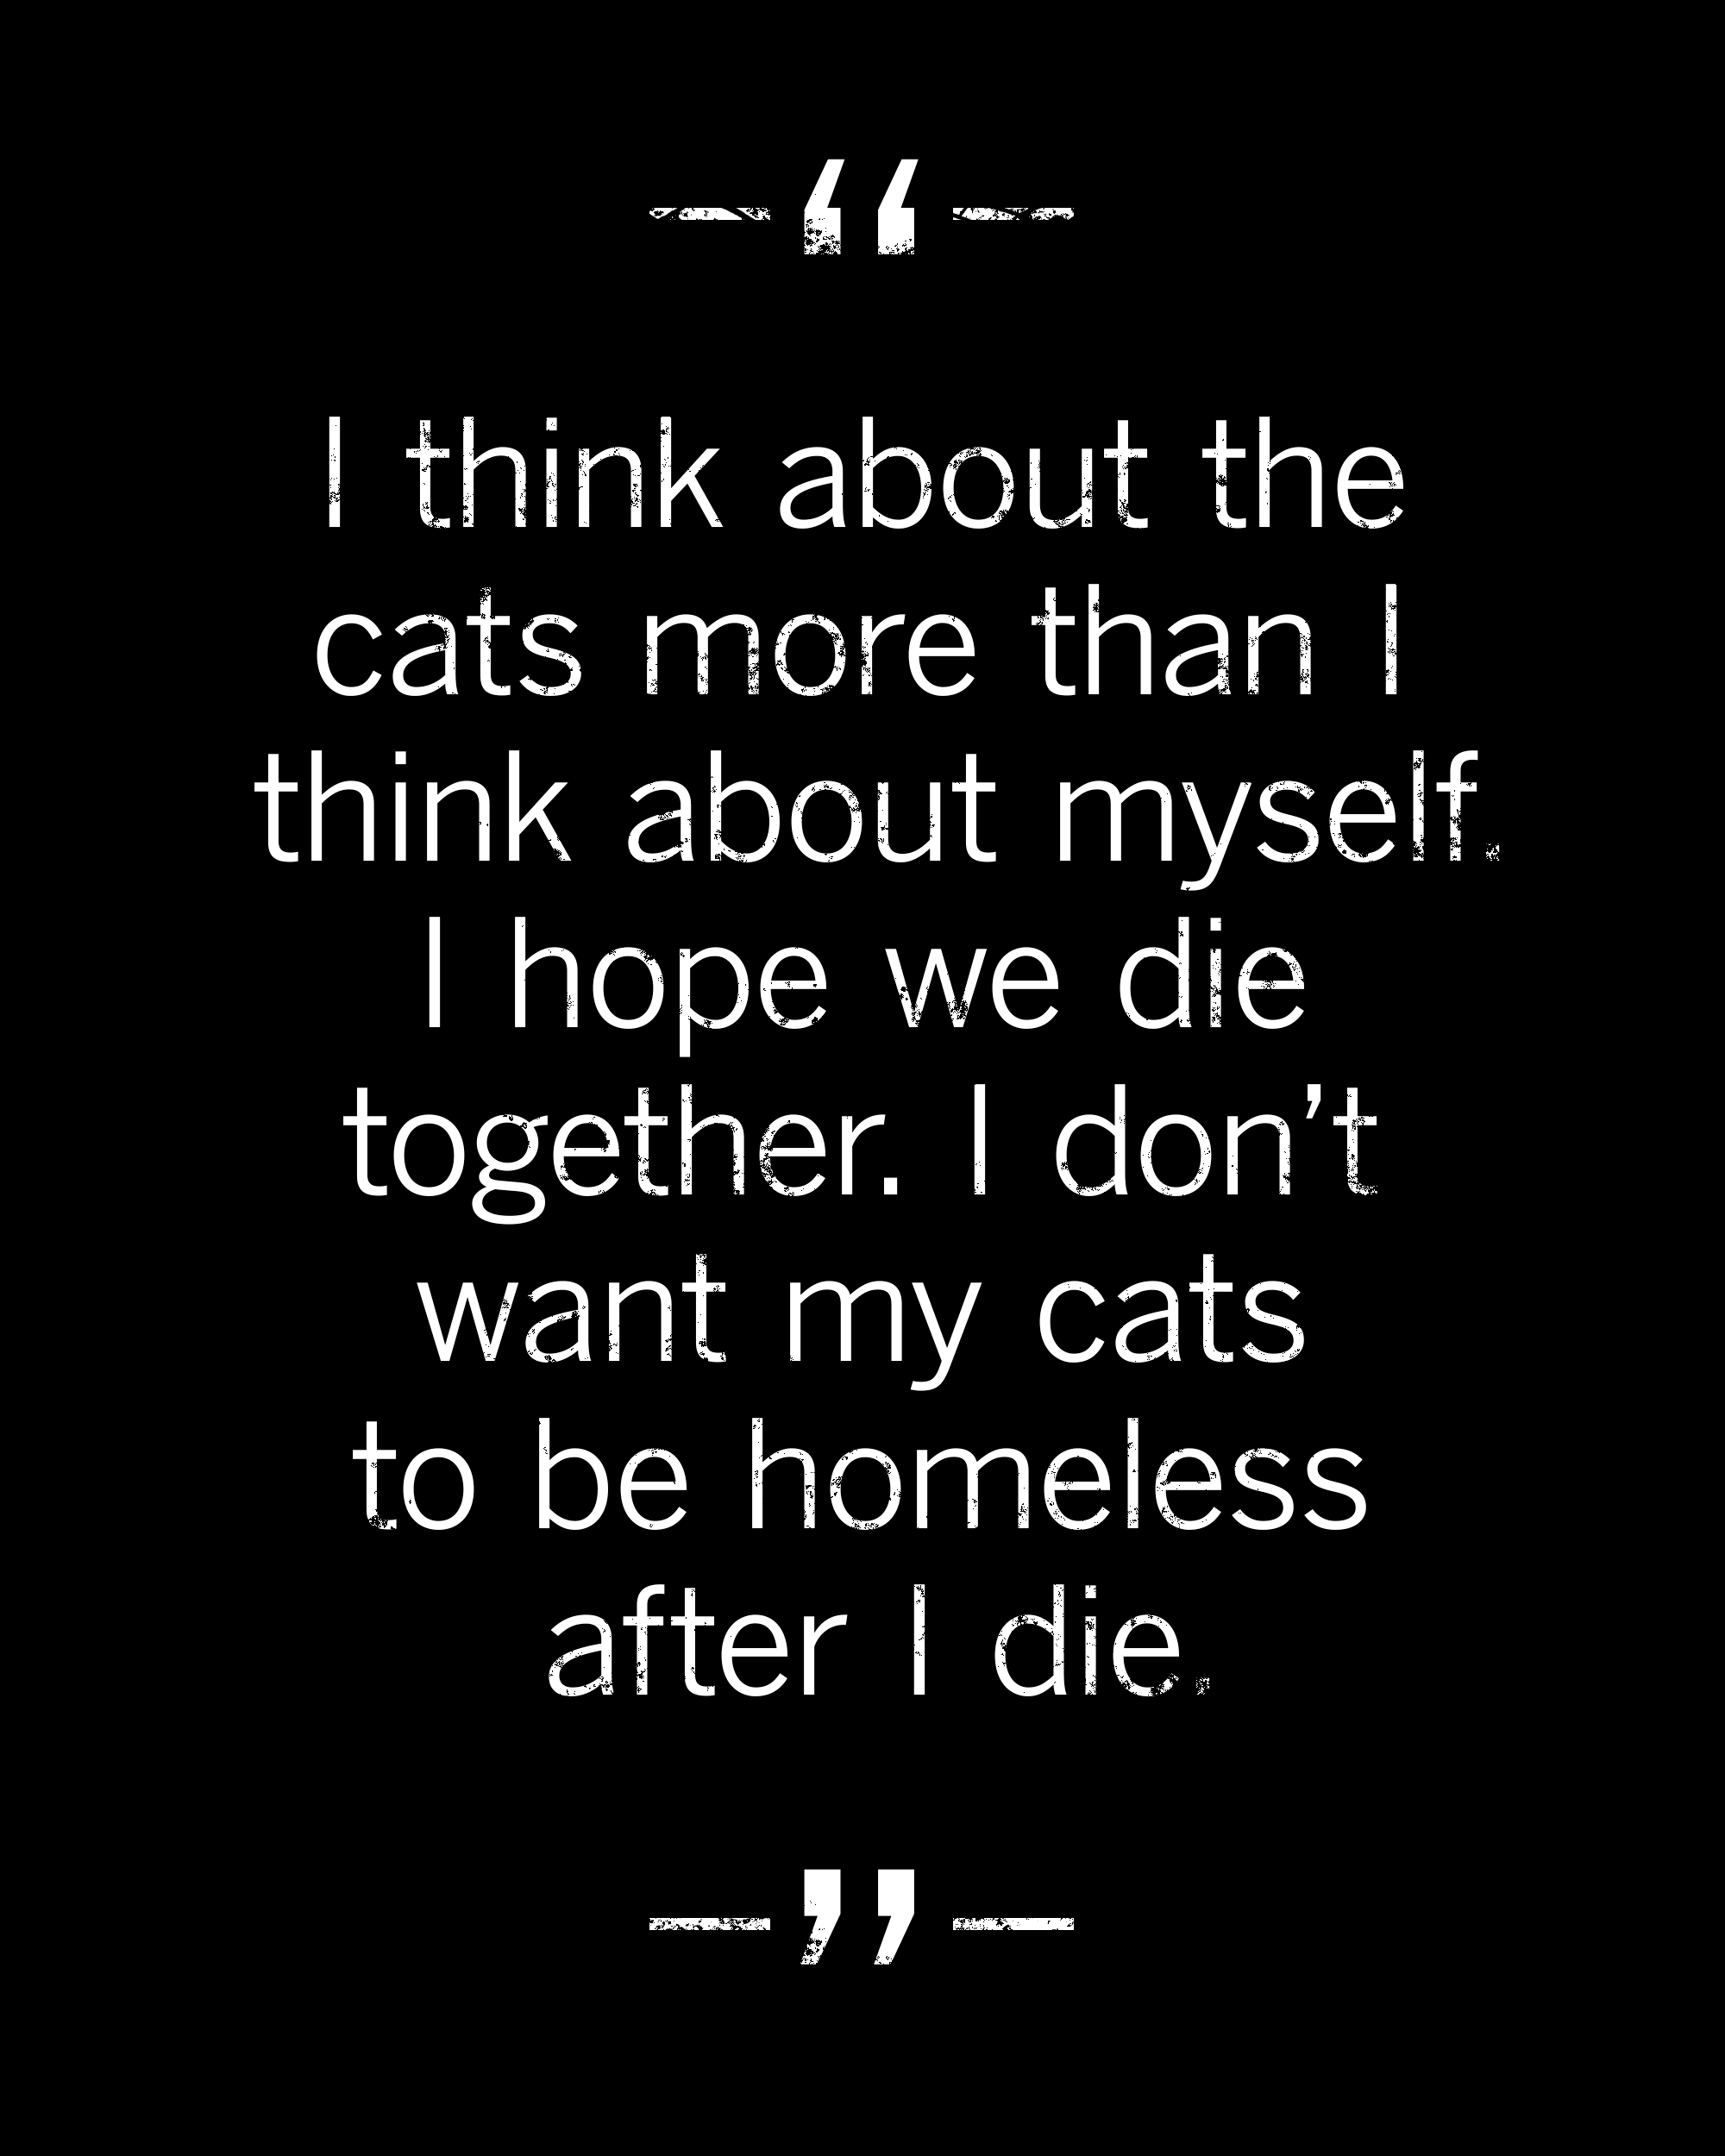 I think about the cats more than myself. I hope we die together. I don't want my cats to be homeless after I die.